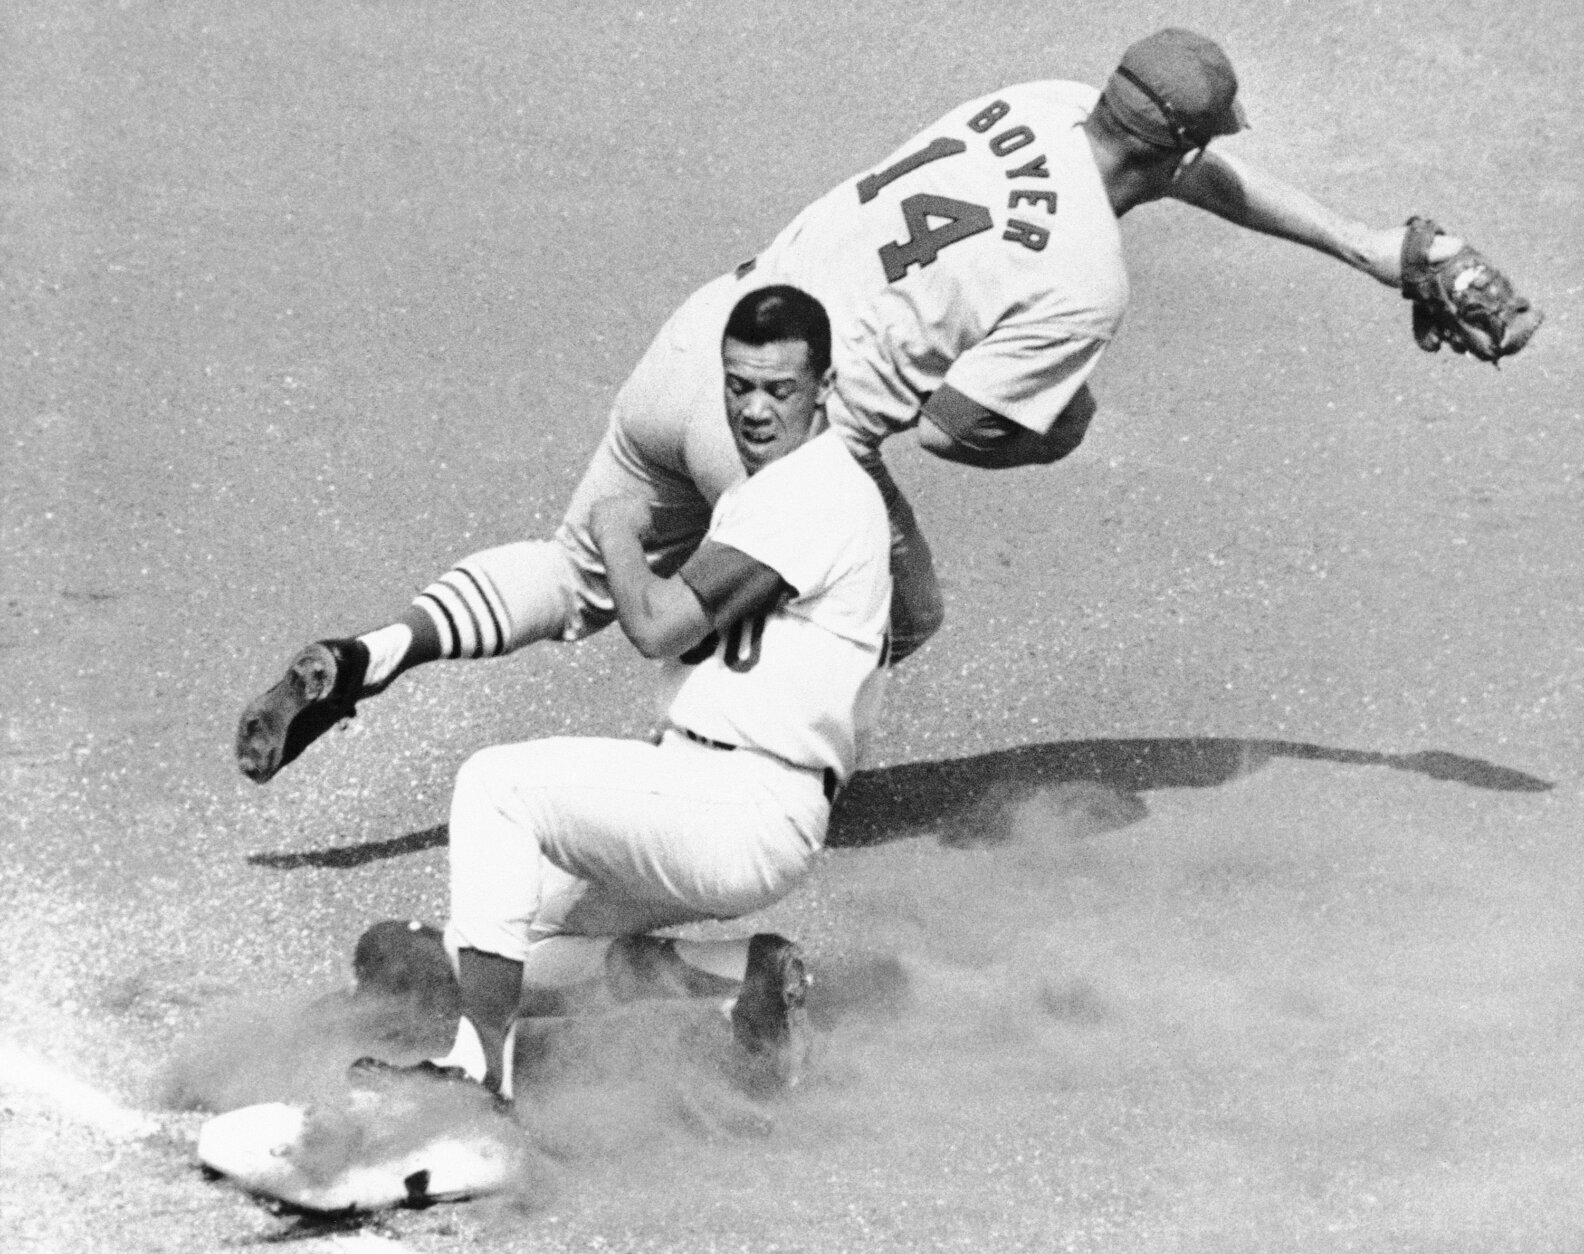 Maury Wills has the law on his side in Hall of Fame bid - Los